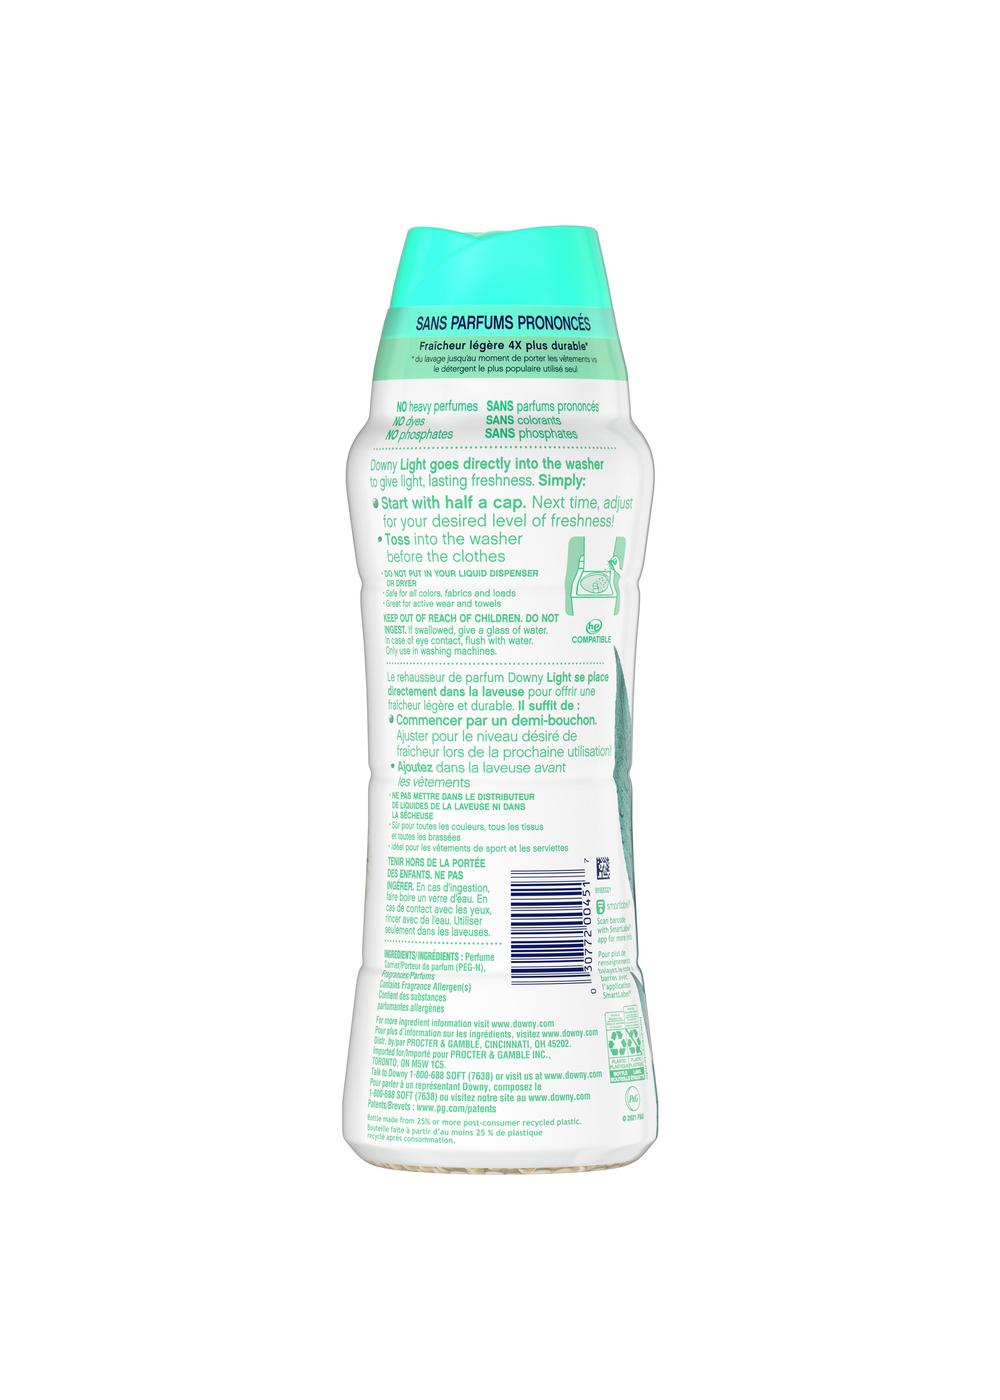 Downy Light Ocean Mist In-Wash Scent Booster - Shop Fresheners at H-E-B